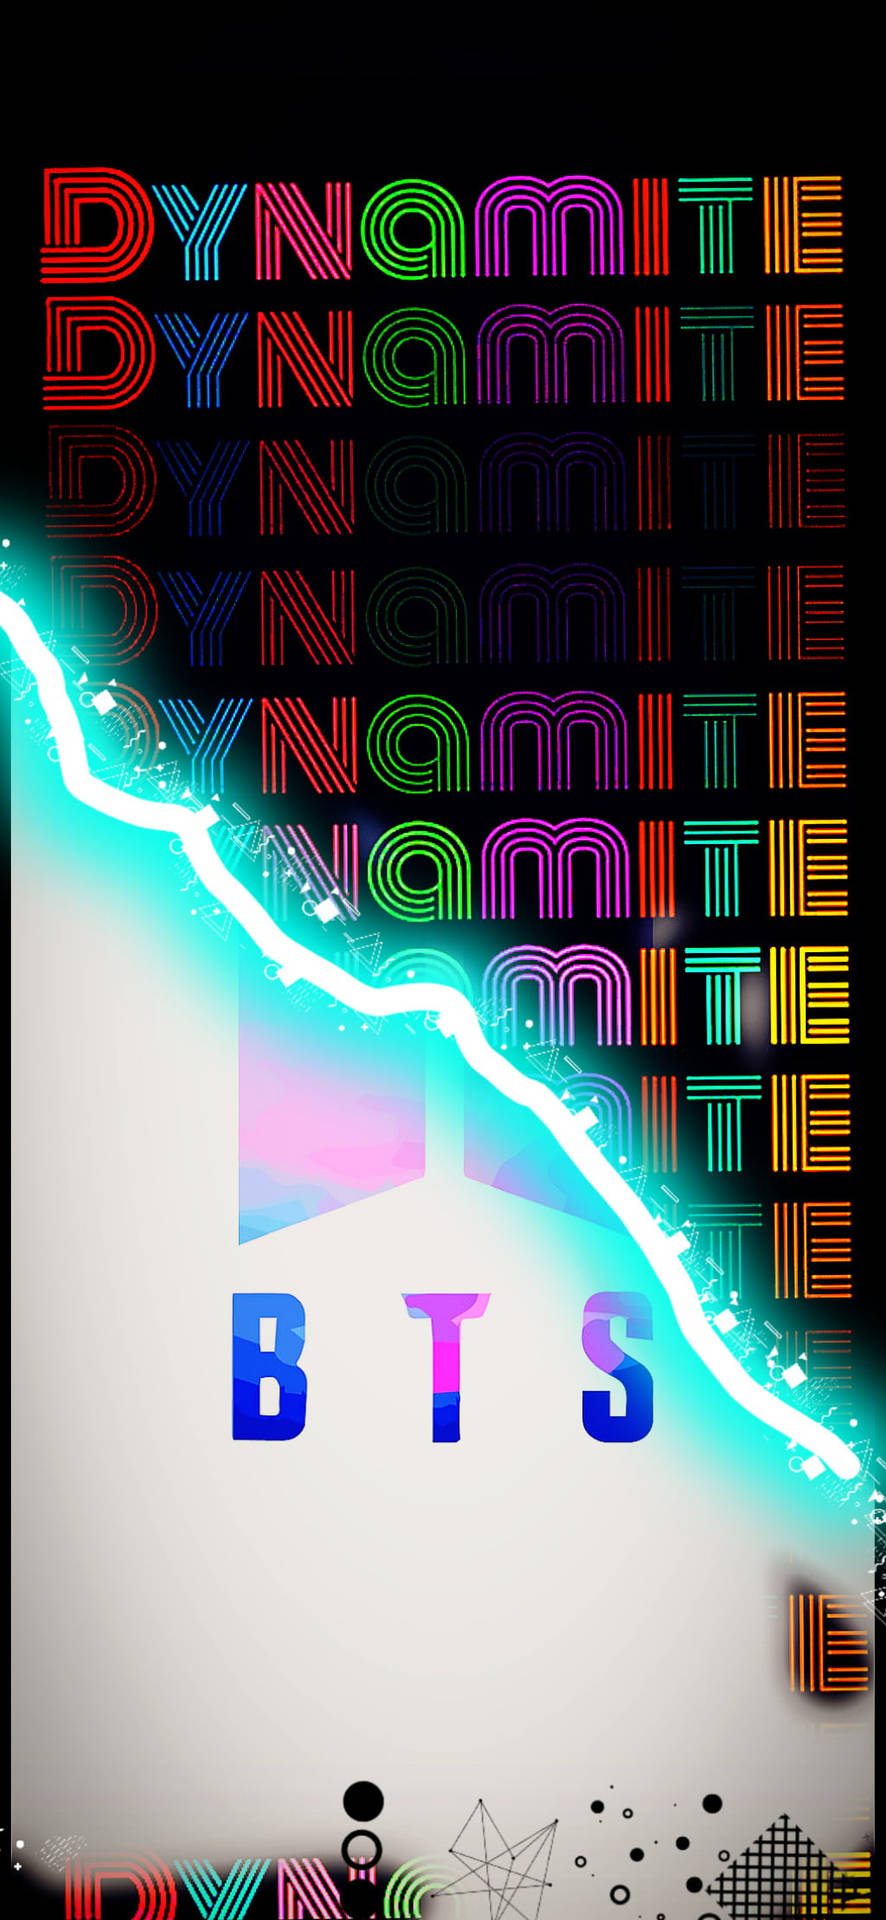 Cool Bts Dynamite Transition Effect Picture